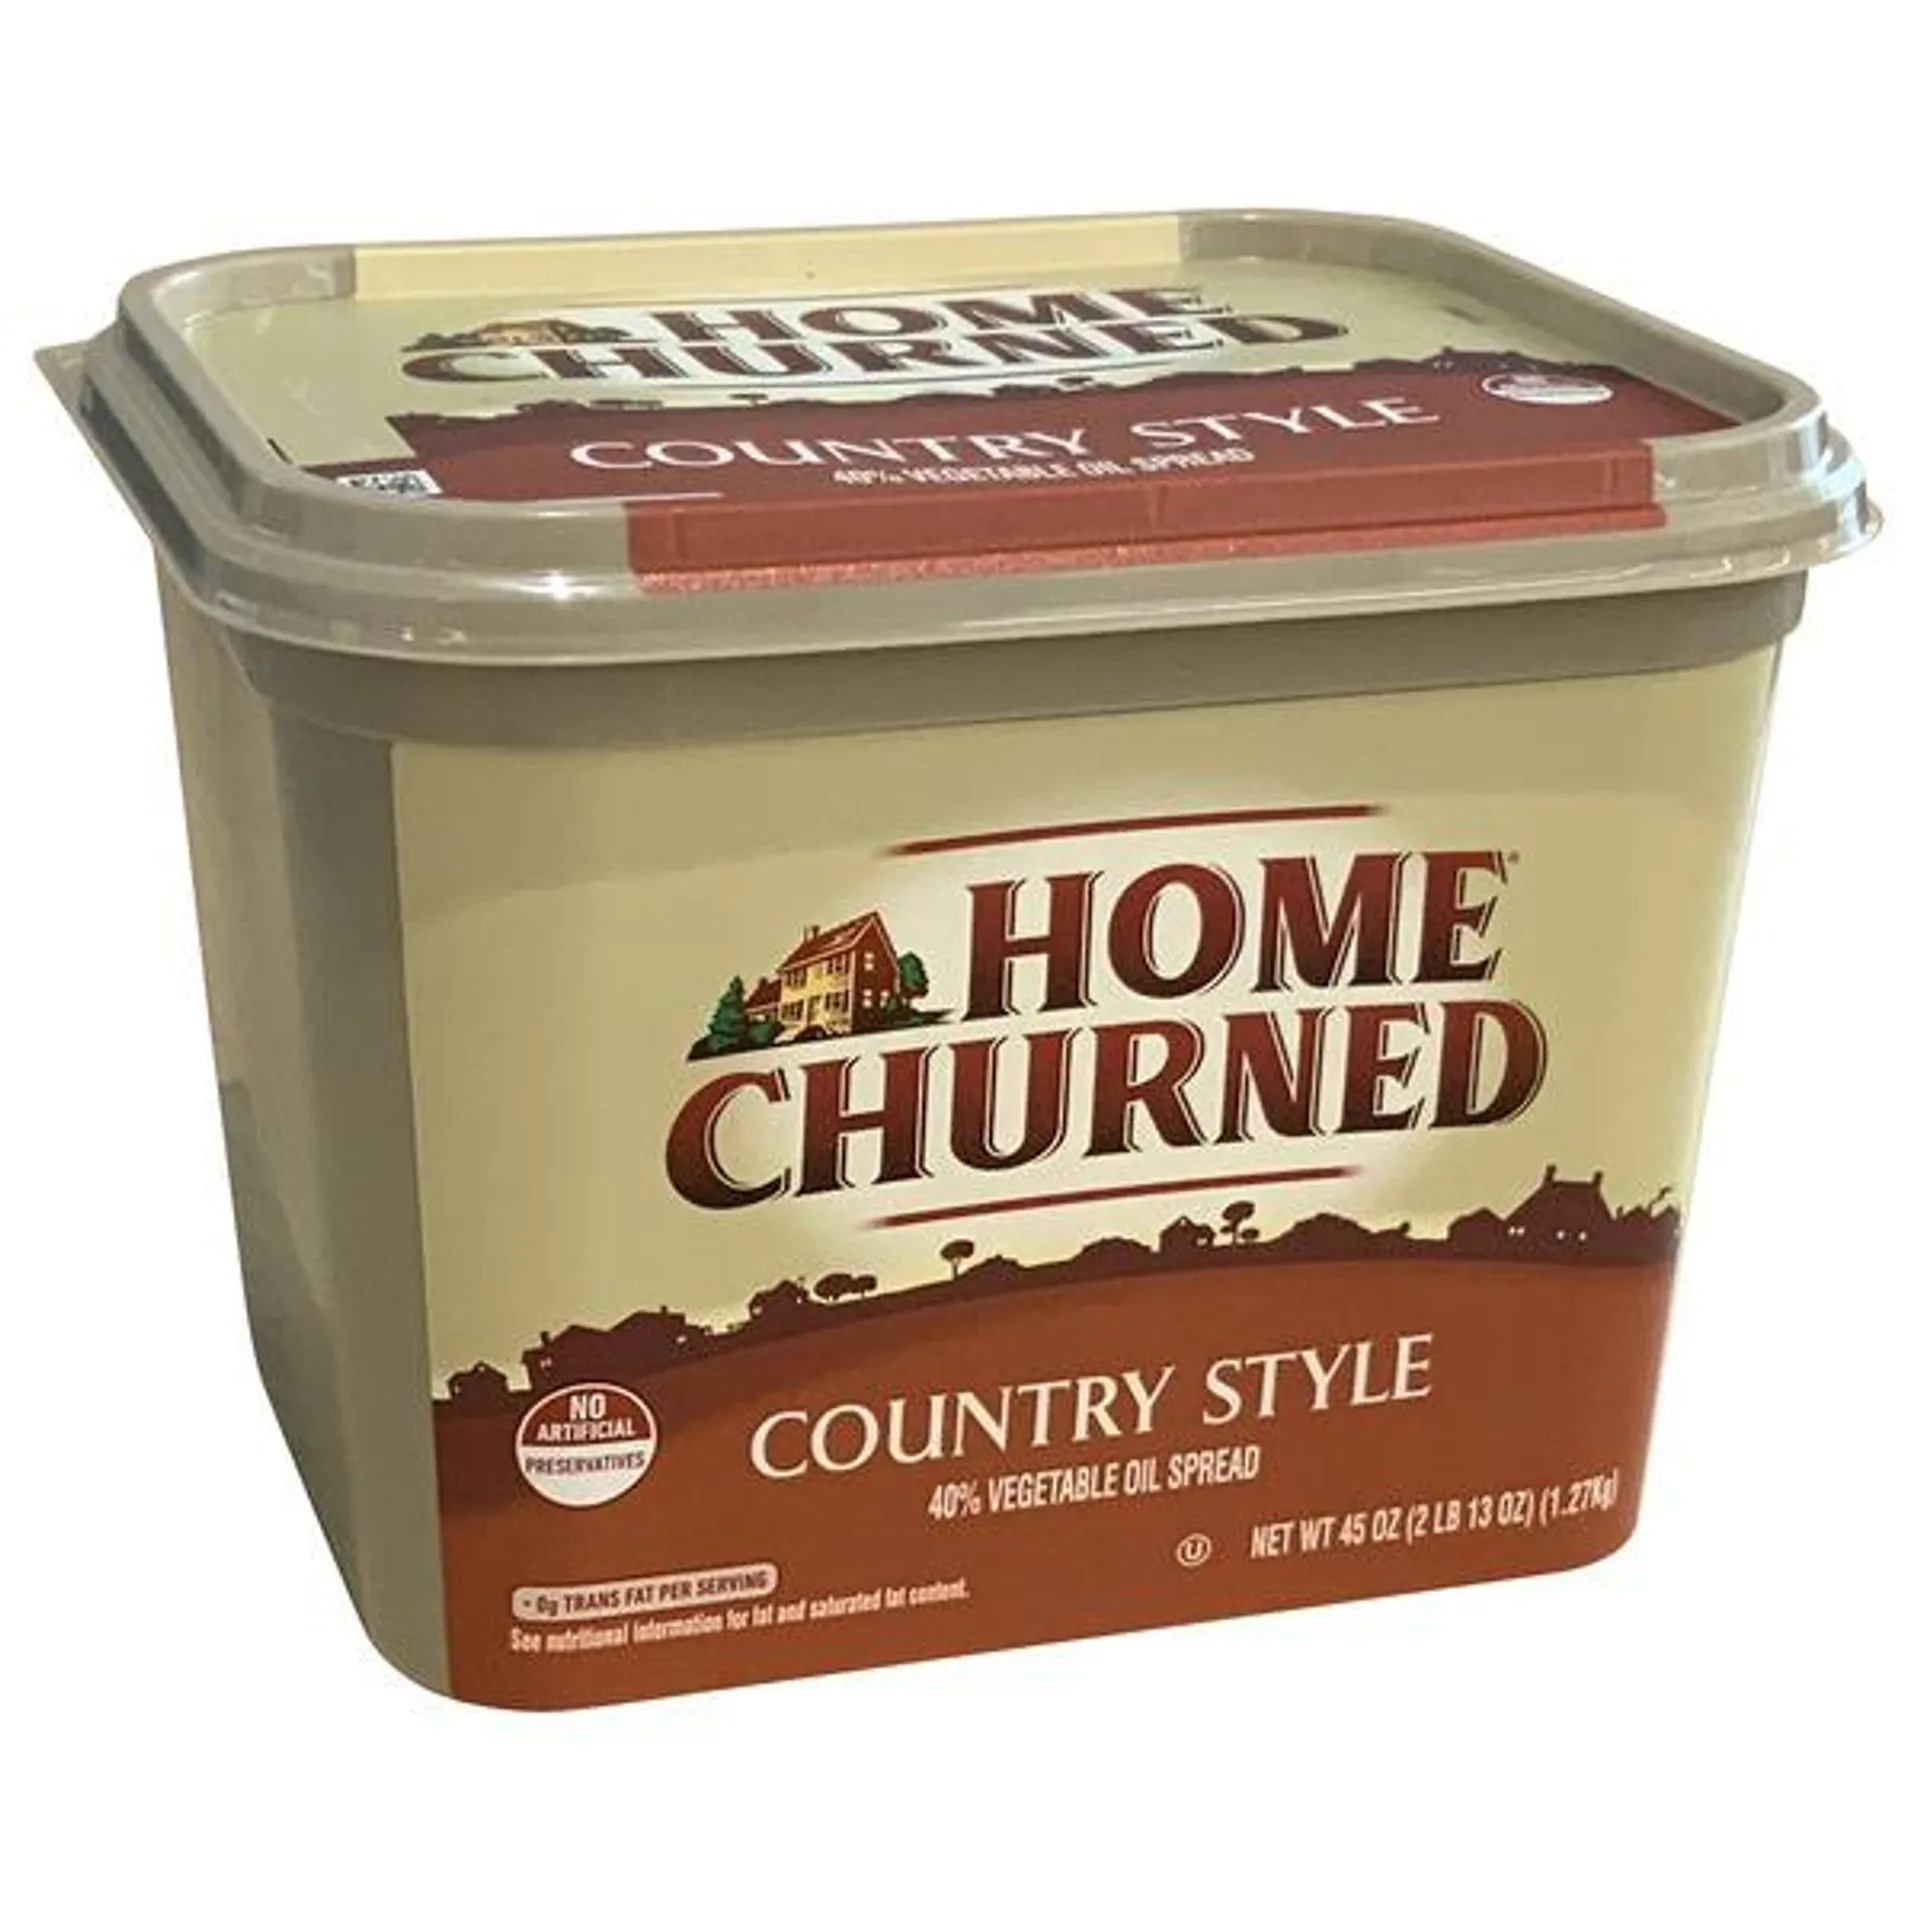 Home Churned Country Style 41% Vegetable Oil Spread